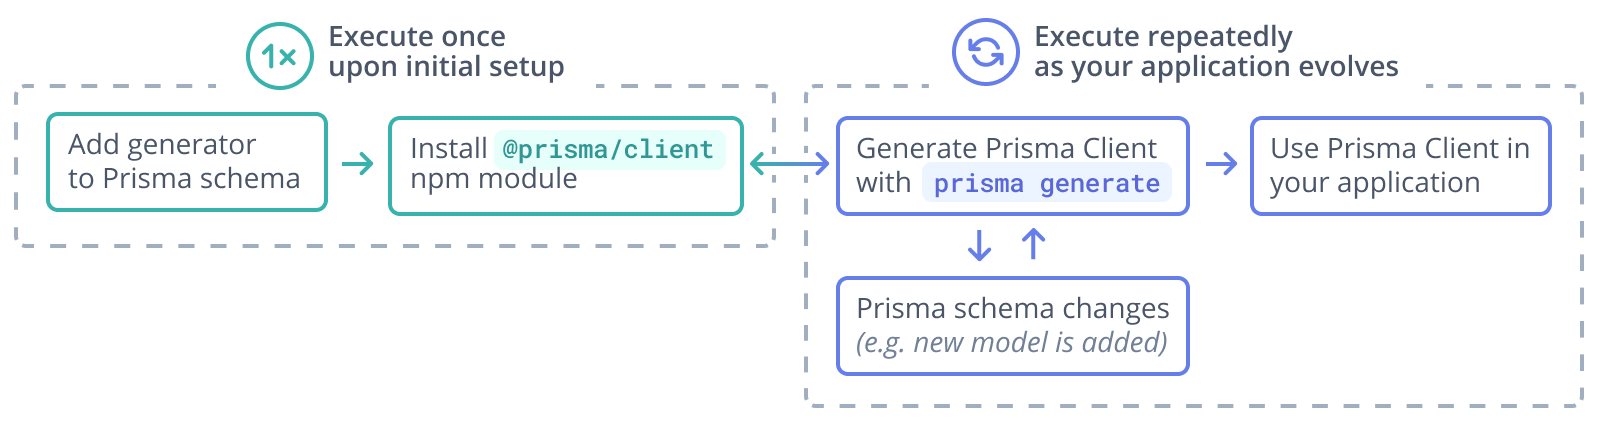 Graphical illustration of the typical workflow for generation of Prisma Client